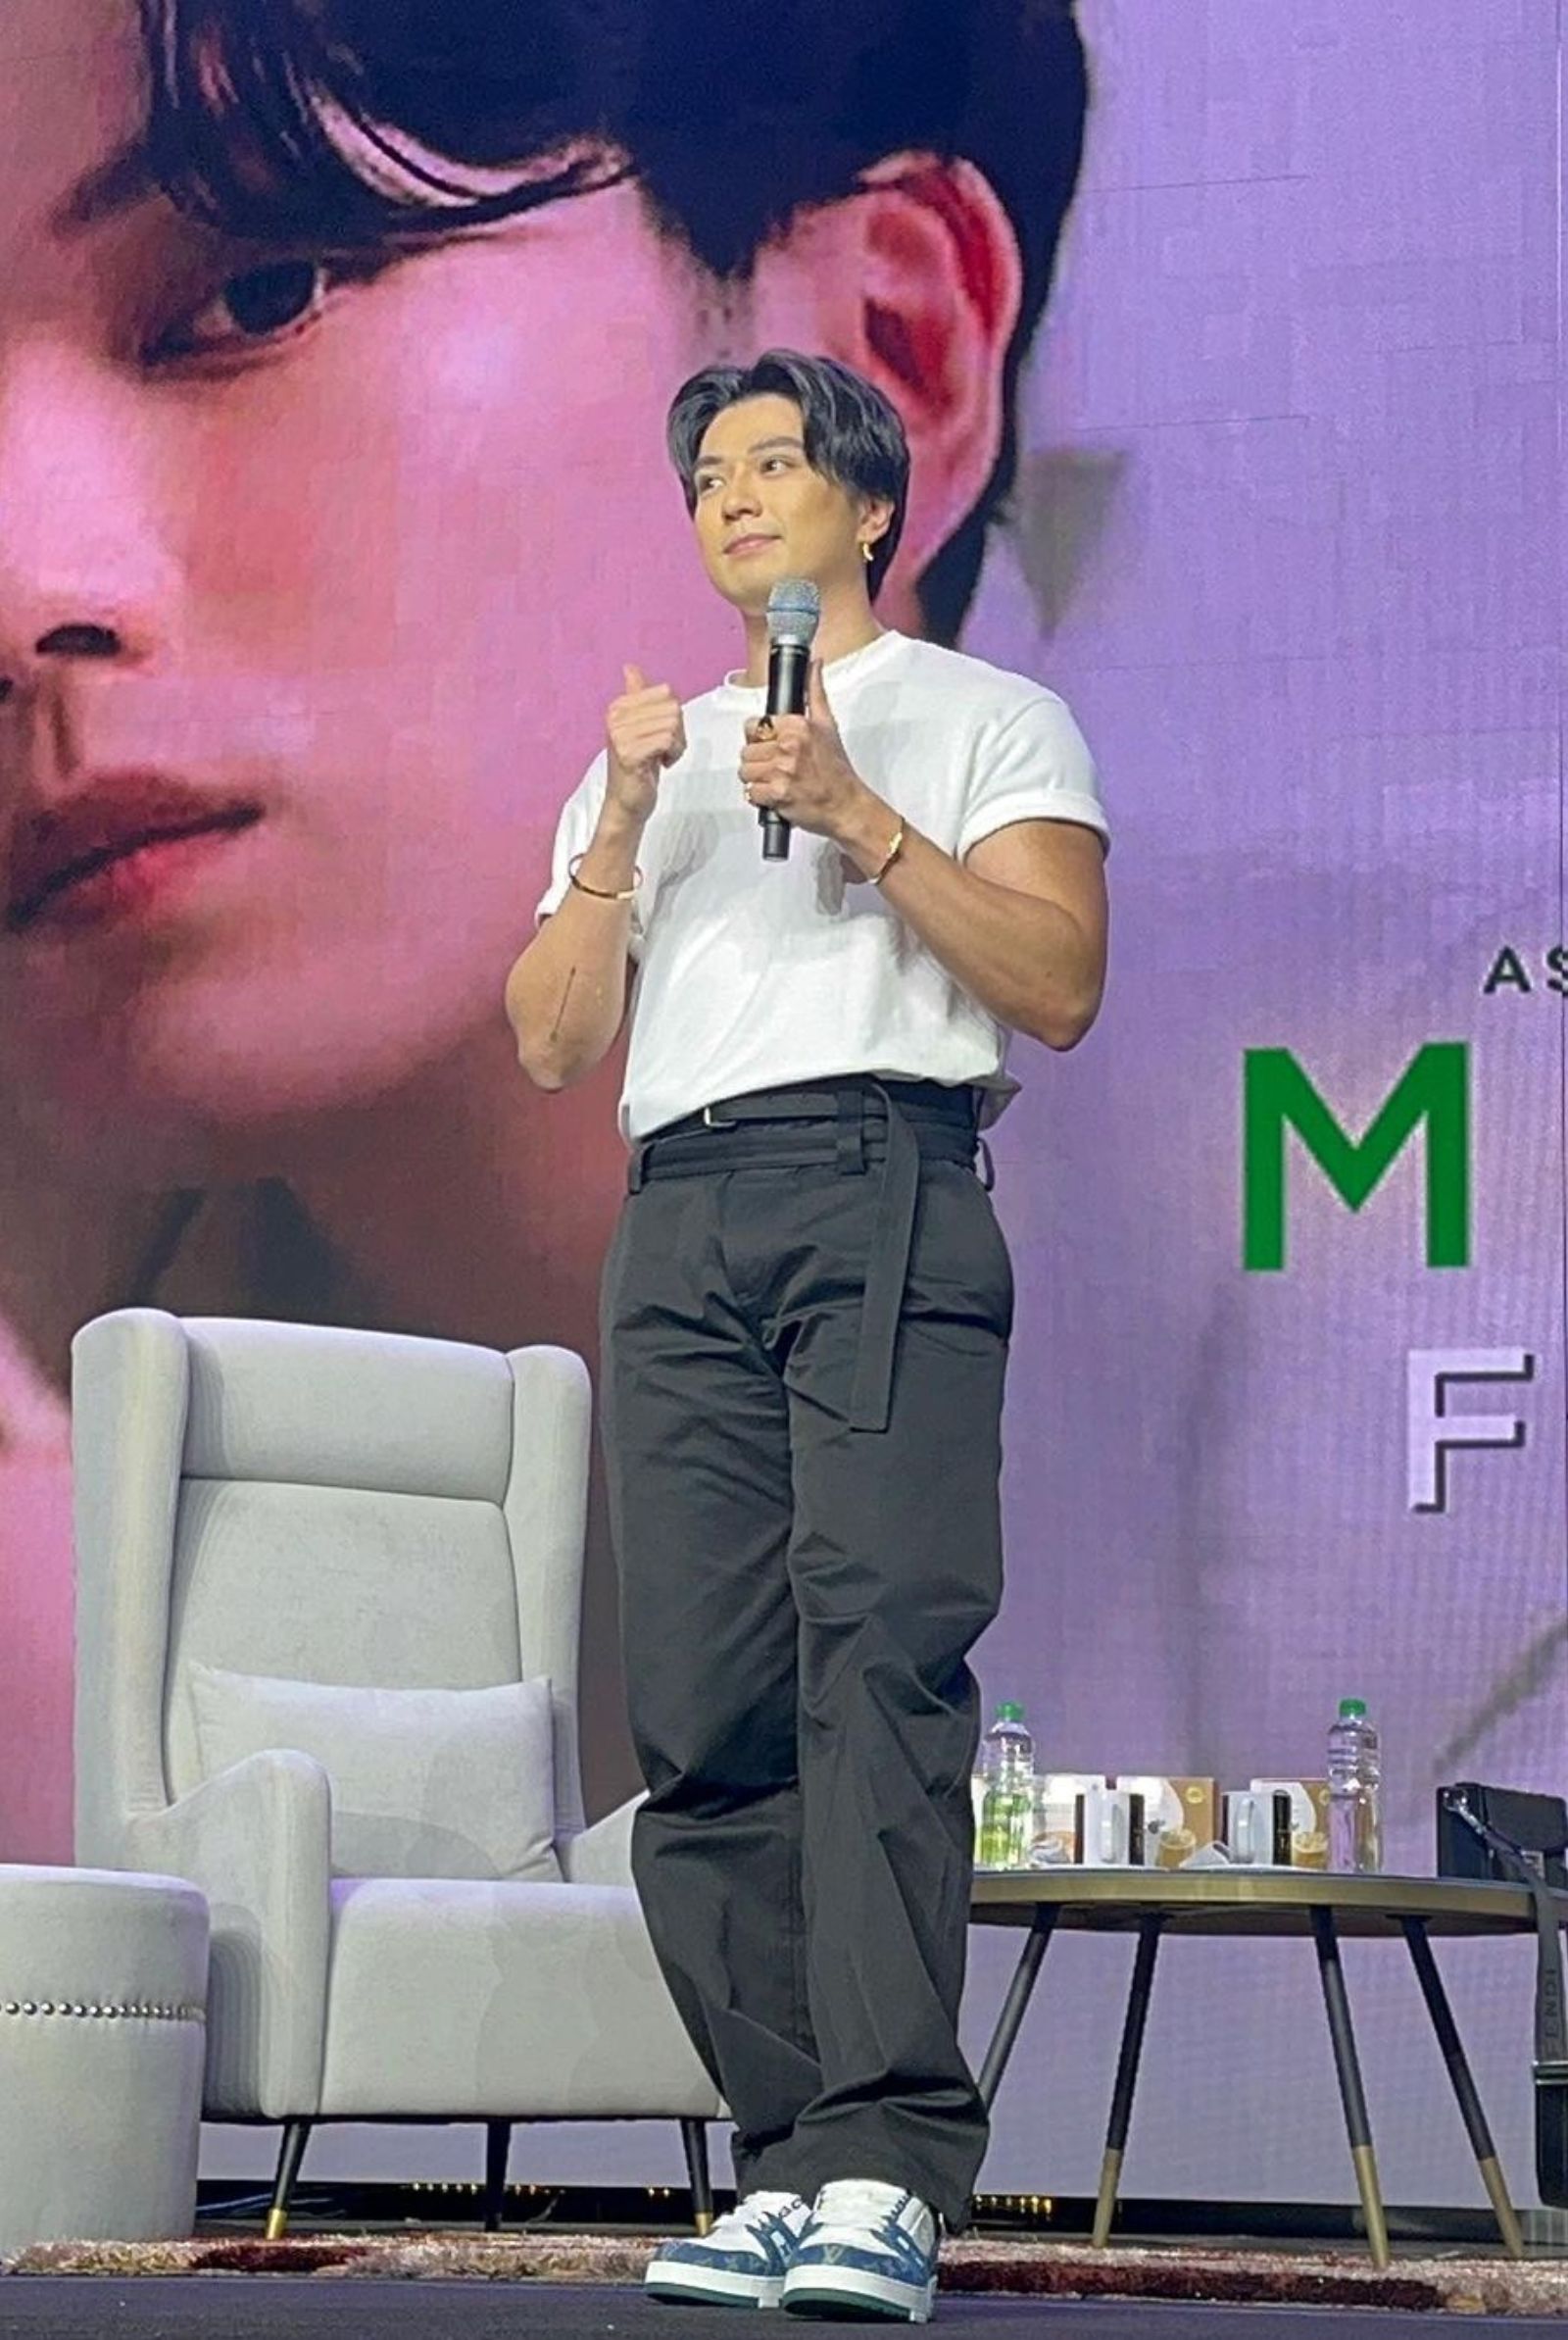 The actor promises a comeback for his Filipino fans